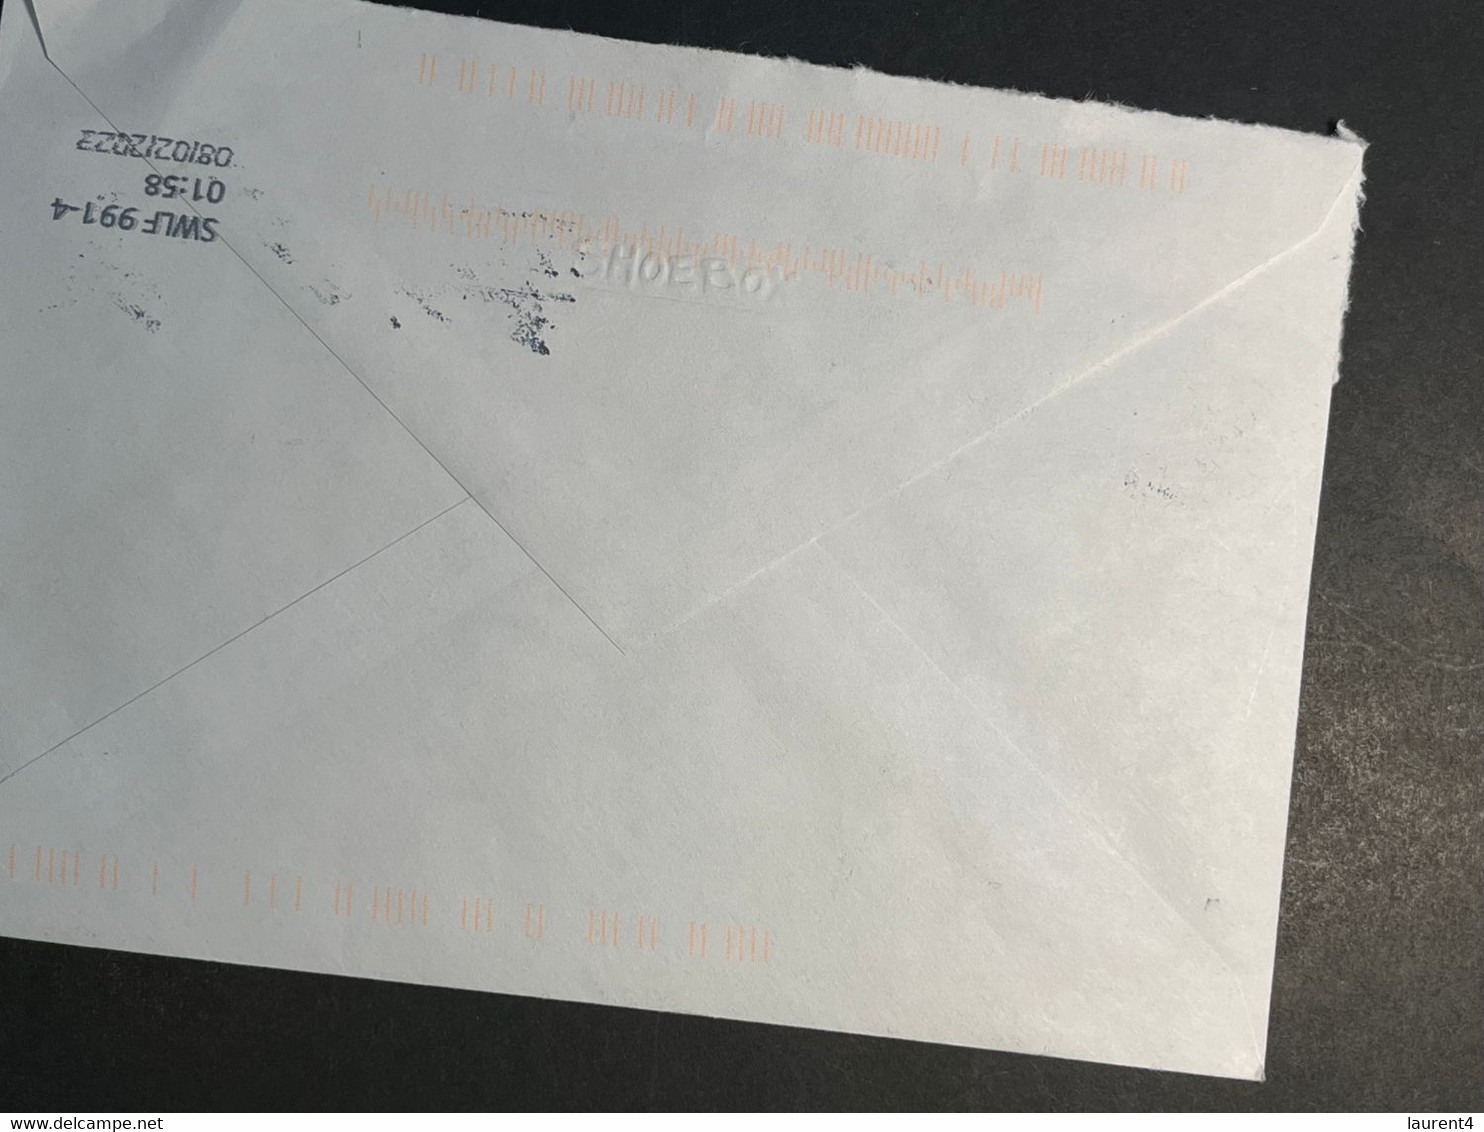 (3 Oø 28) Letter Posted From USA To Australia (2023) - Cartas & Documentos